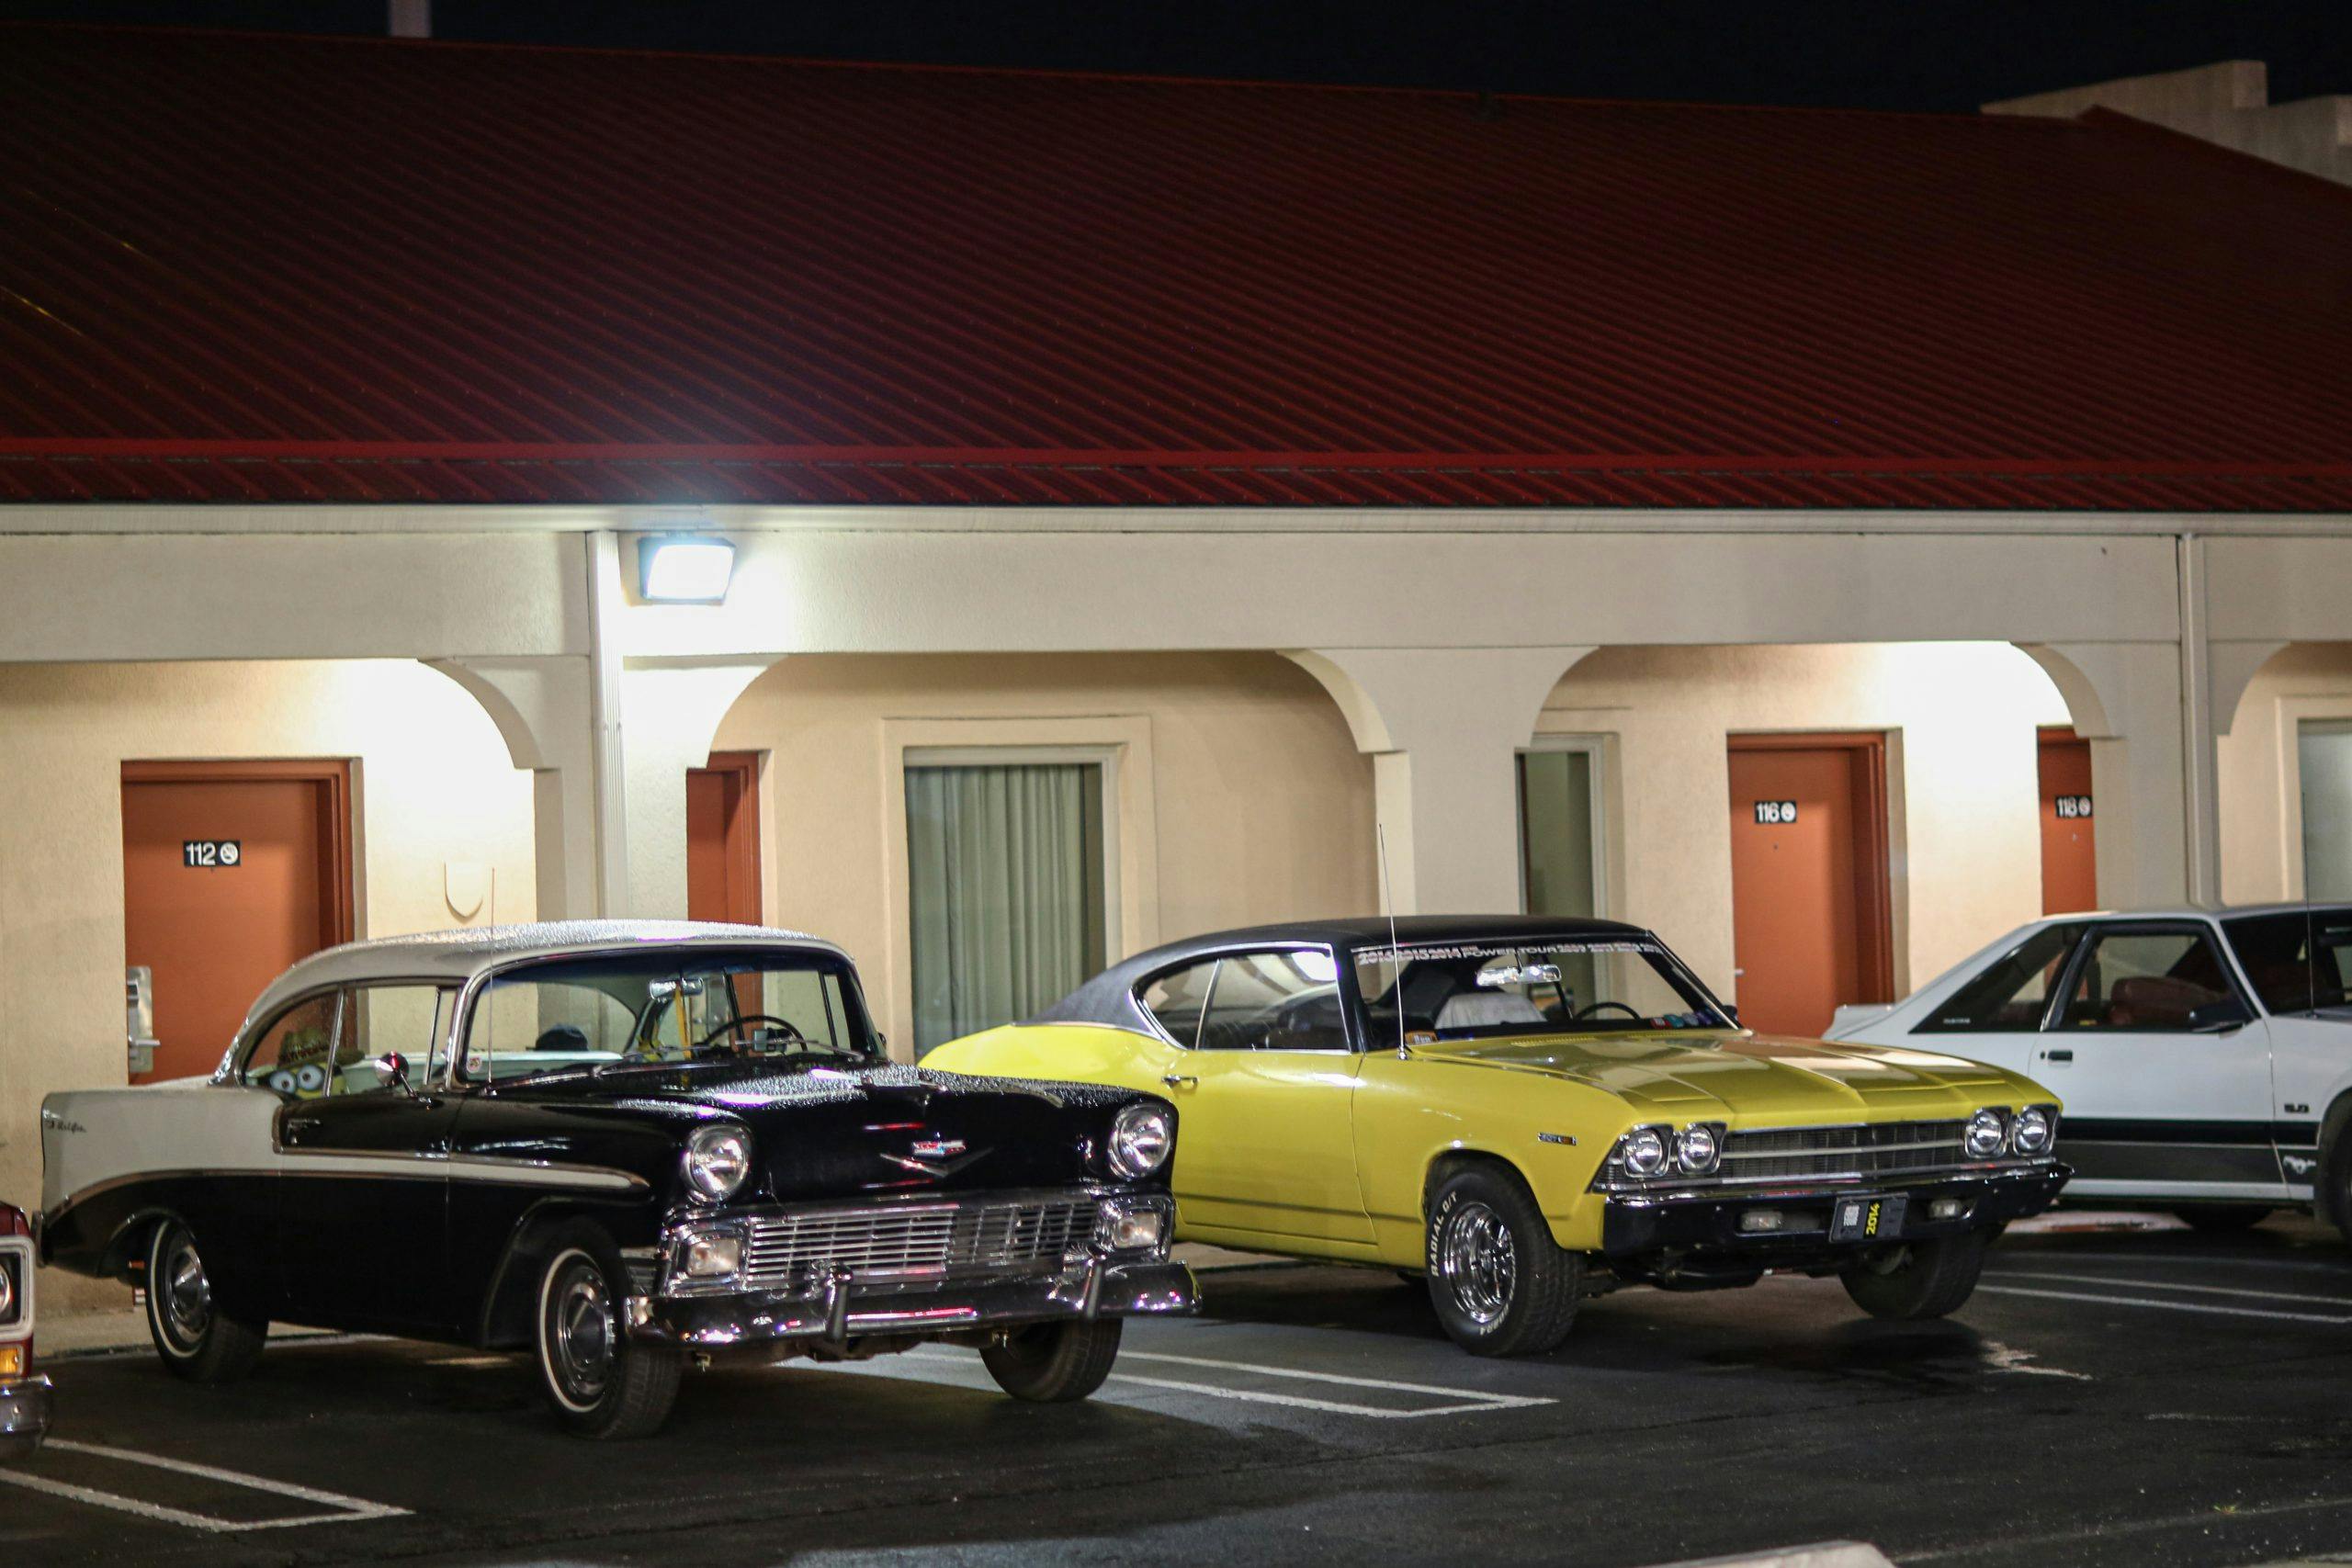 Hot rods take a pitstop at motel